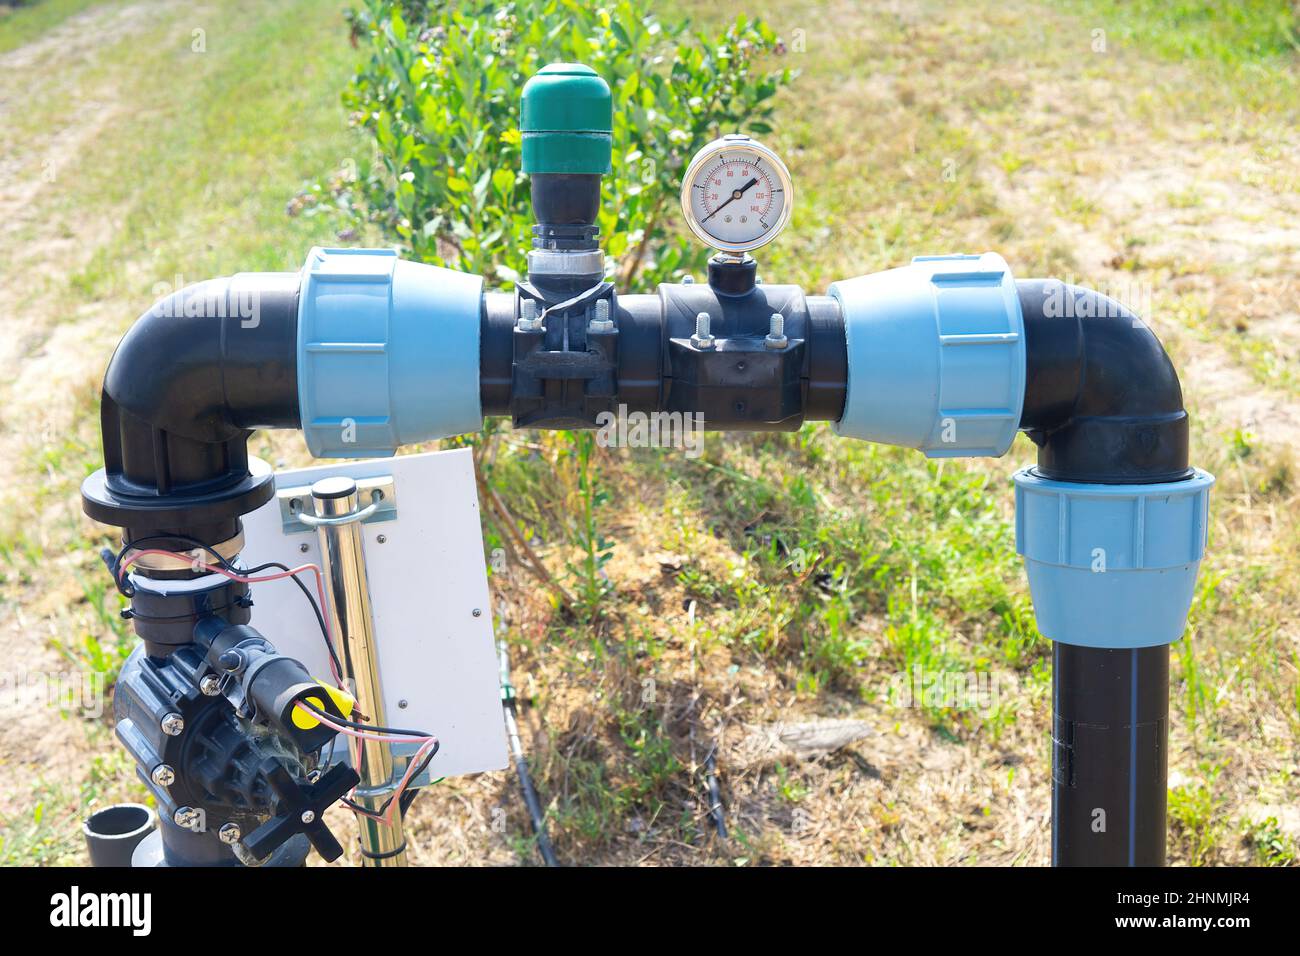 Berries farm drip irrigation system components. Stock Photo